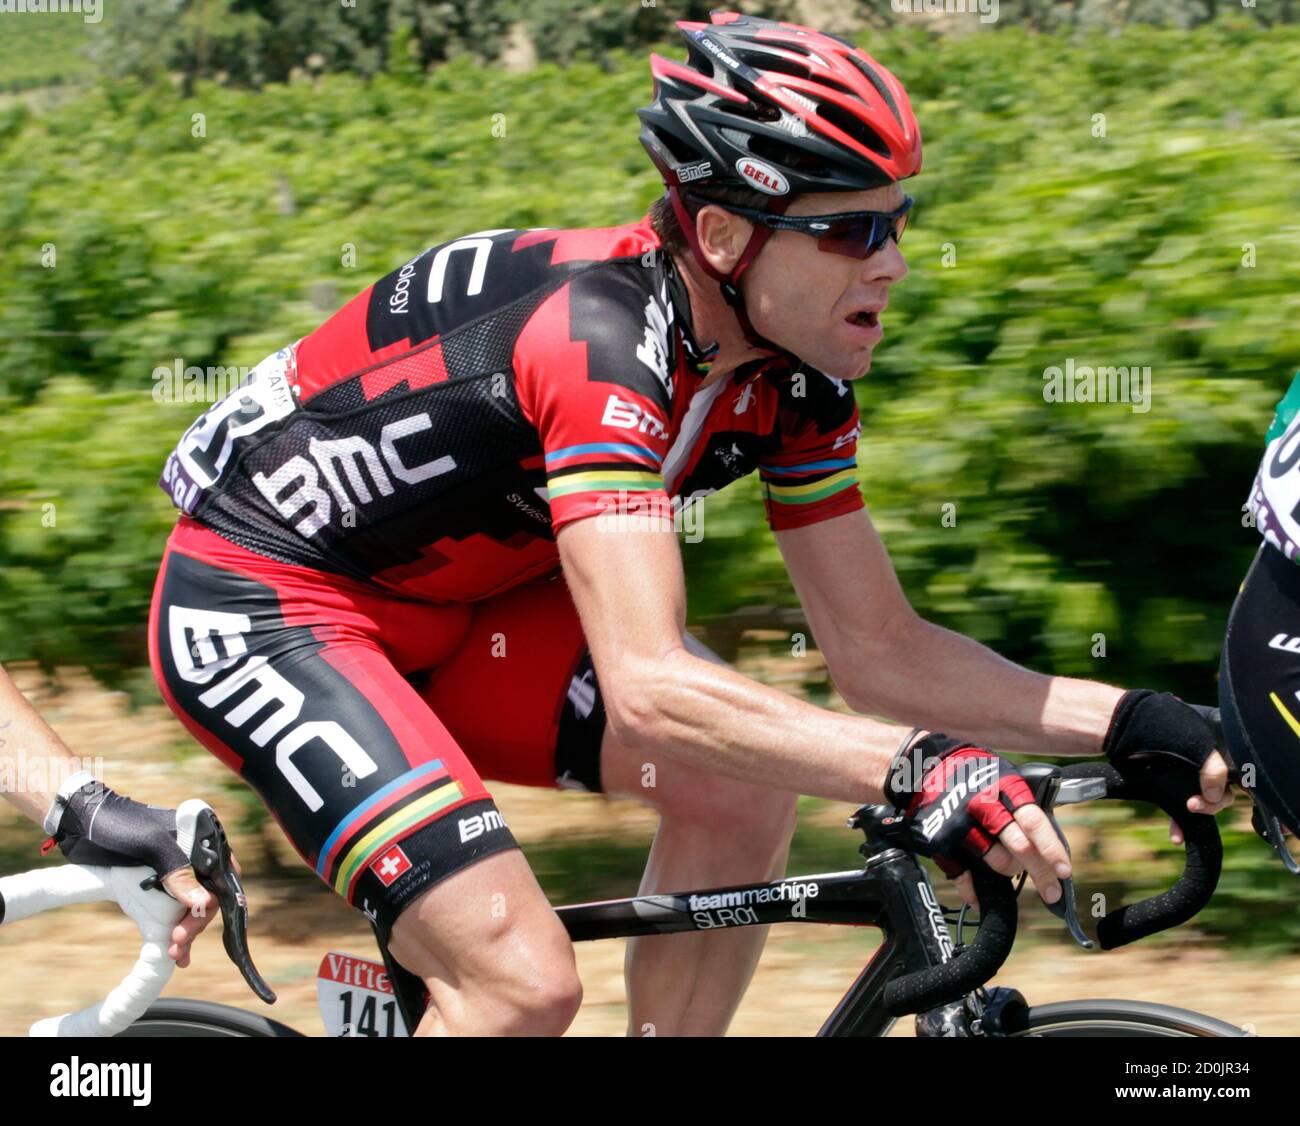 BMC Racing Team's Cadel Evans of Australia rides during the 15th stage of  the Tour de